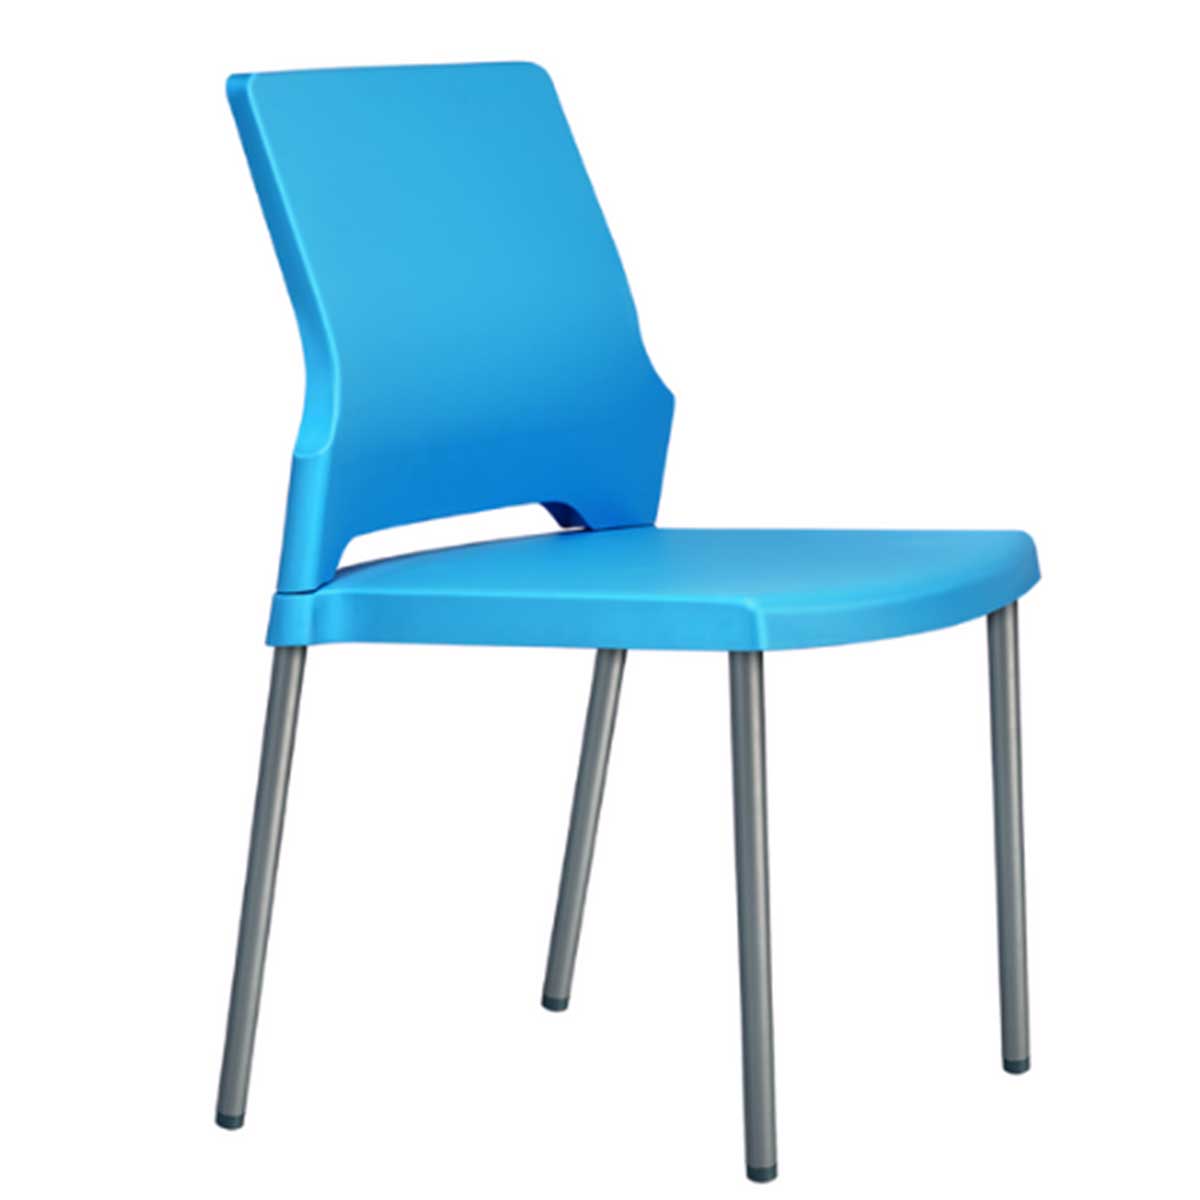 Cafeteria Chair Manufacturers, Suppliers in Rohini Sector 22